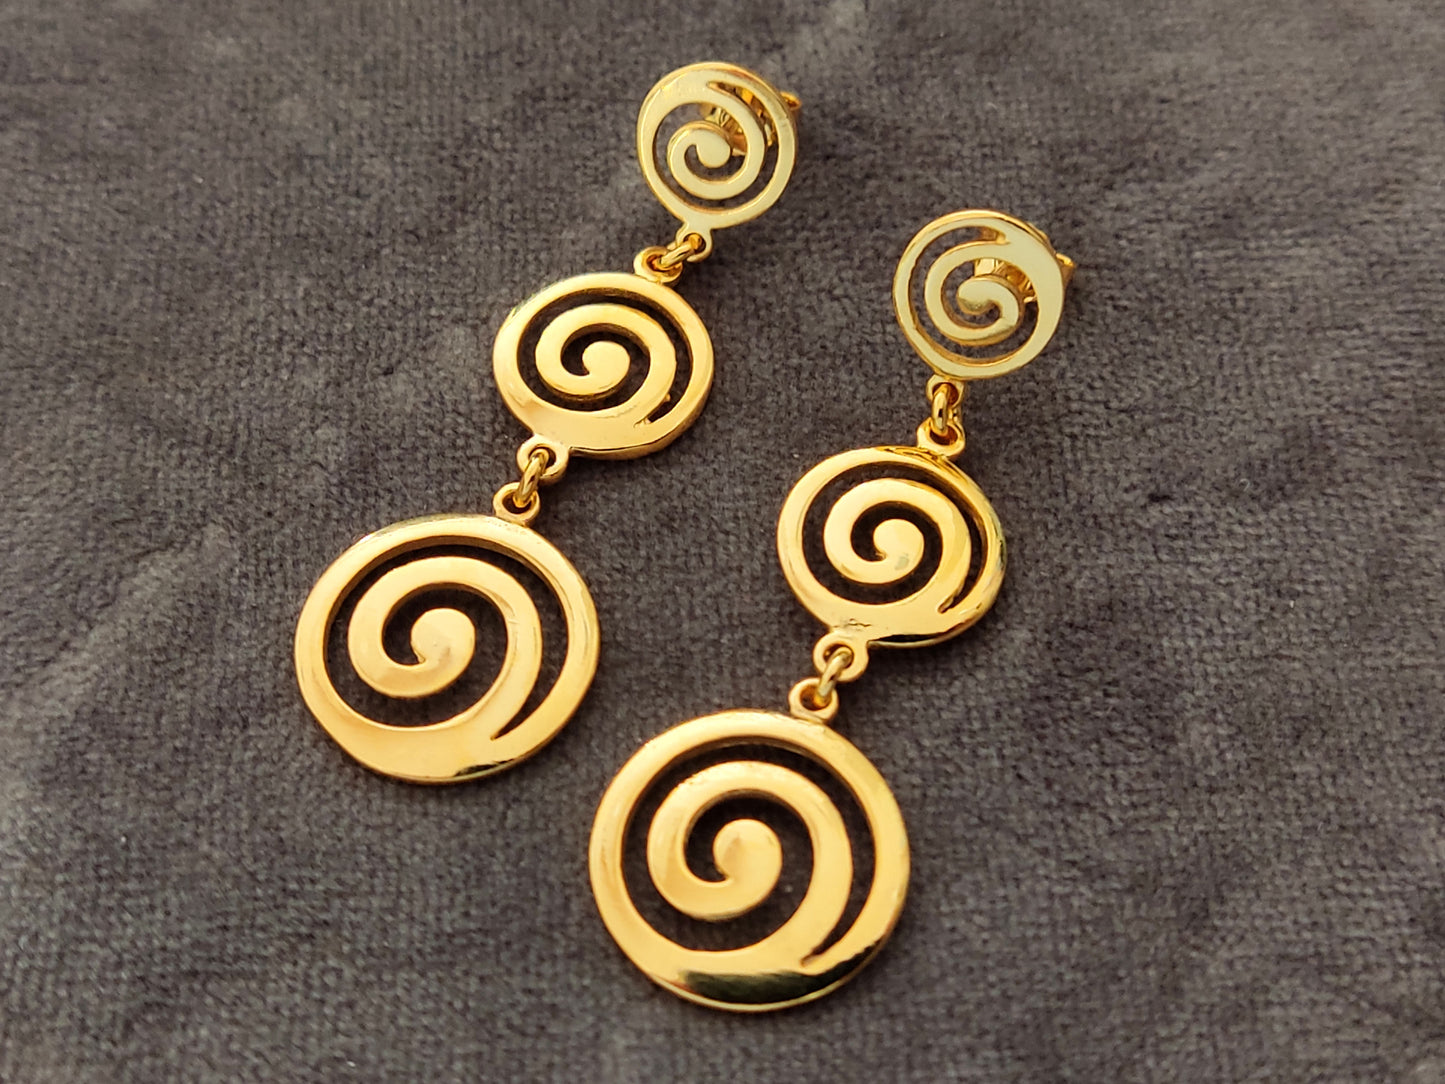 Greek spiral dangle long earrings made of Sterling Silver 925 with gold plated finish on gray velvet.